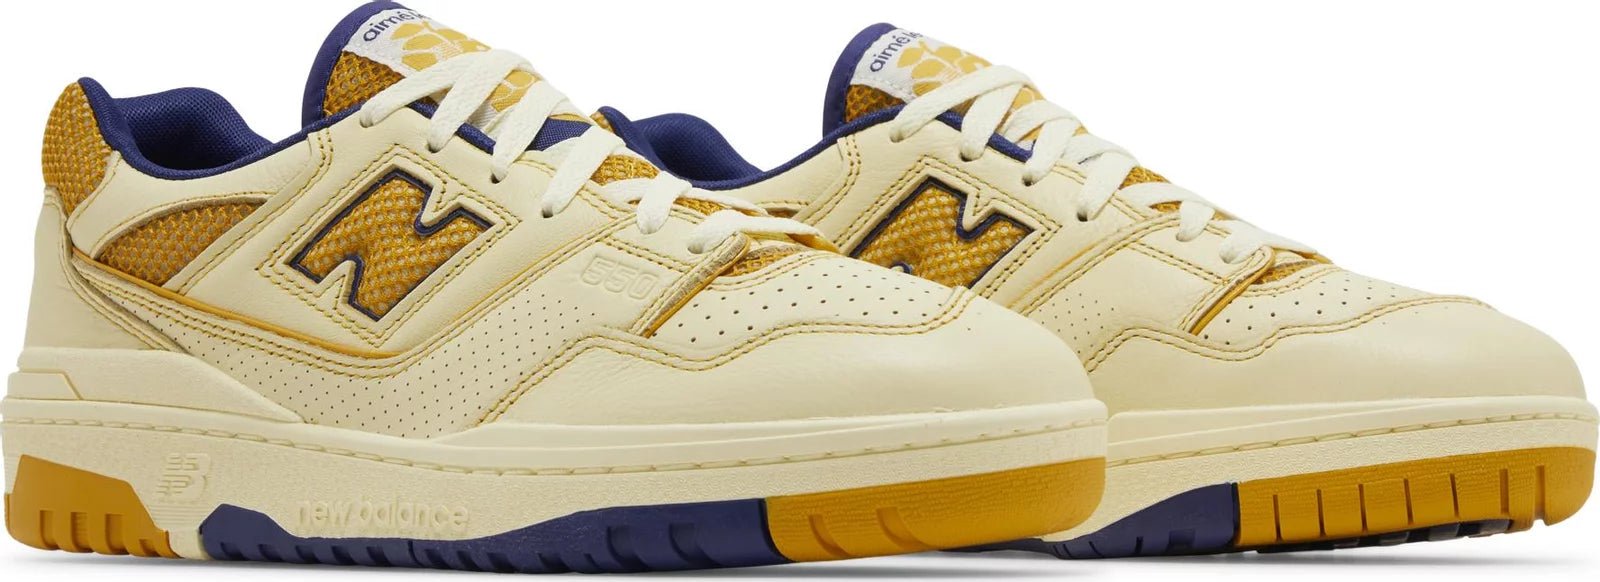 New Balance 550 Aime Leon Dore Masaryk Community Gym Yellow - Sneakersbe Sneakers Sale Online